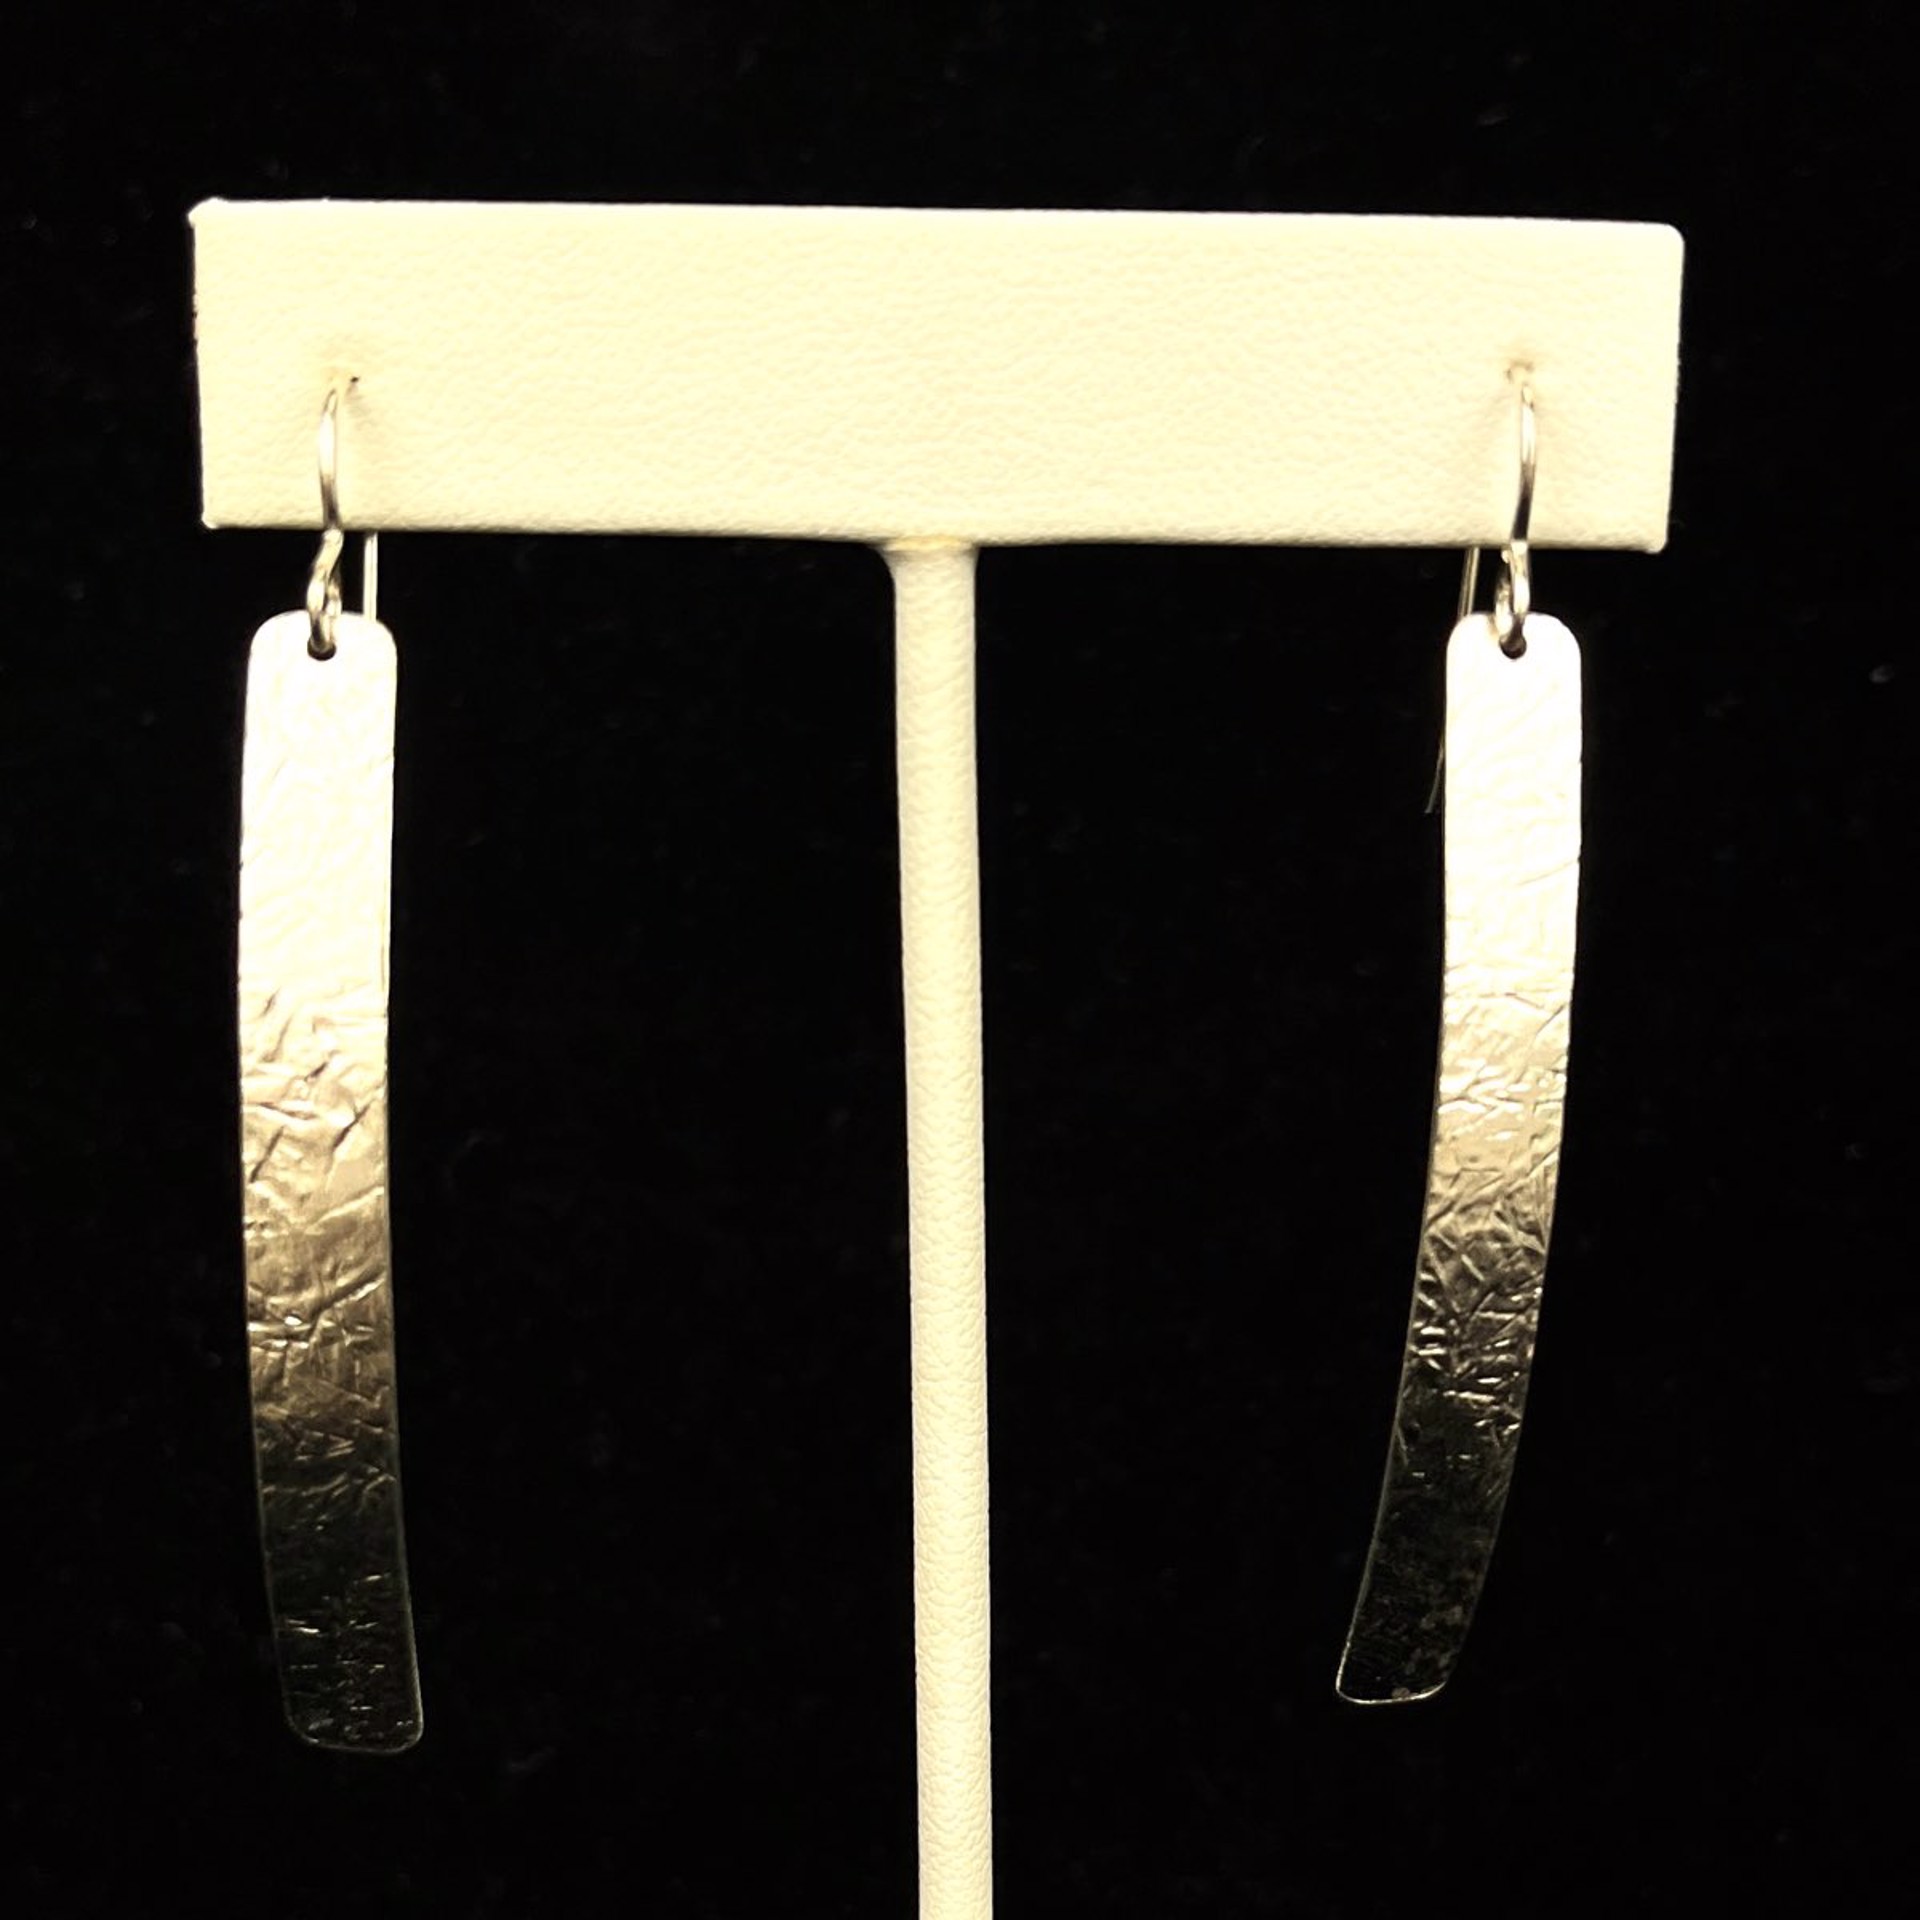 Textured Sterling Thin Rectangle Earrings by Nichole Collins